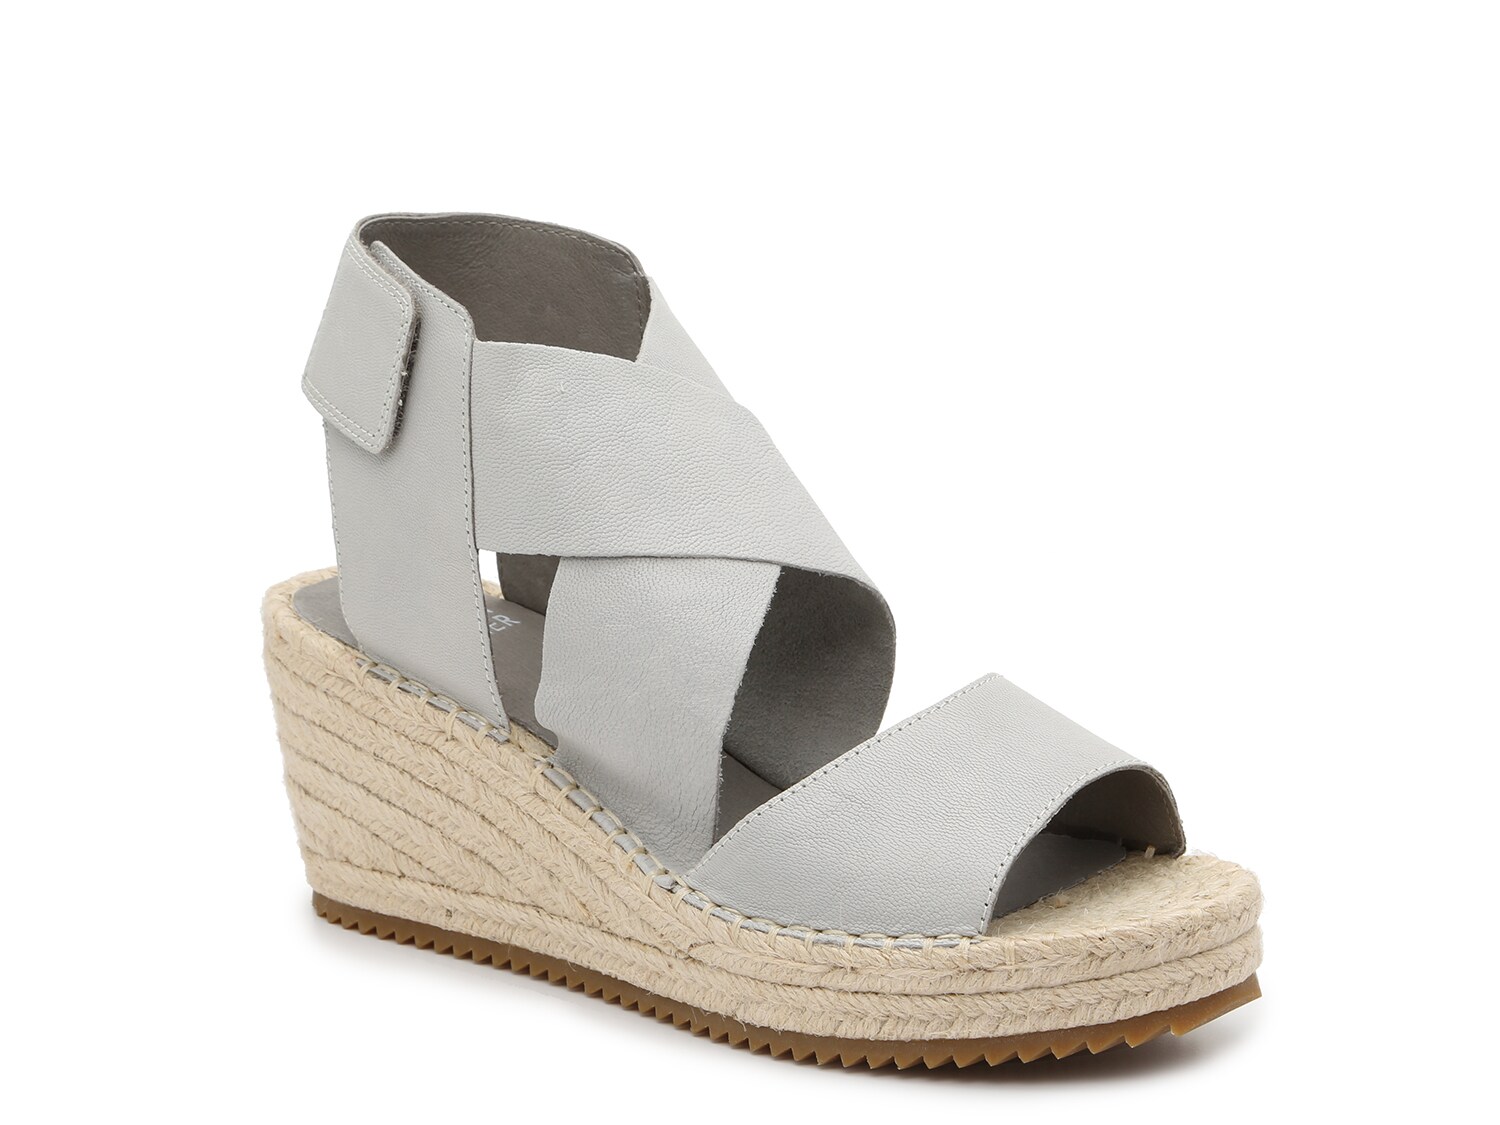 Eileen Fisher Willow 3 Espadrille Wedge Sandal - Free Shipping | DSW